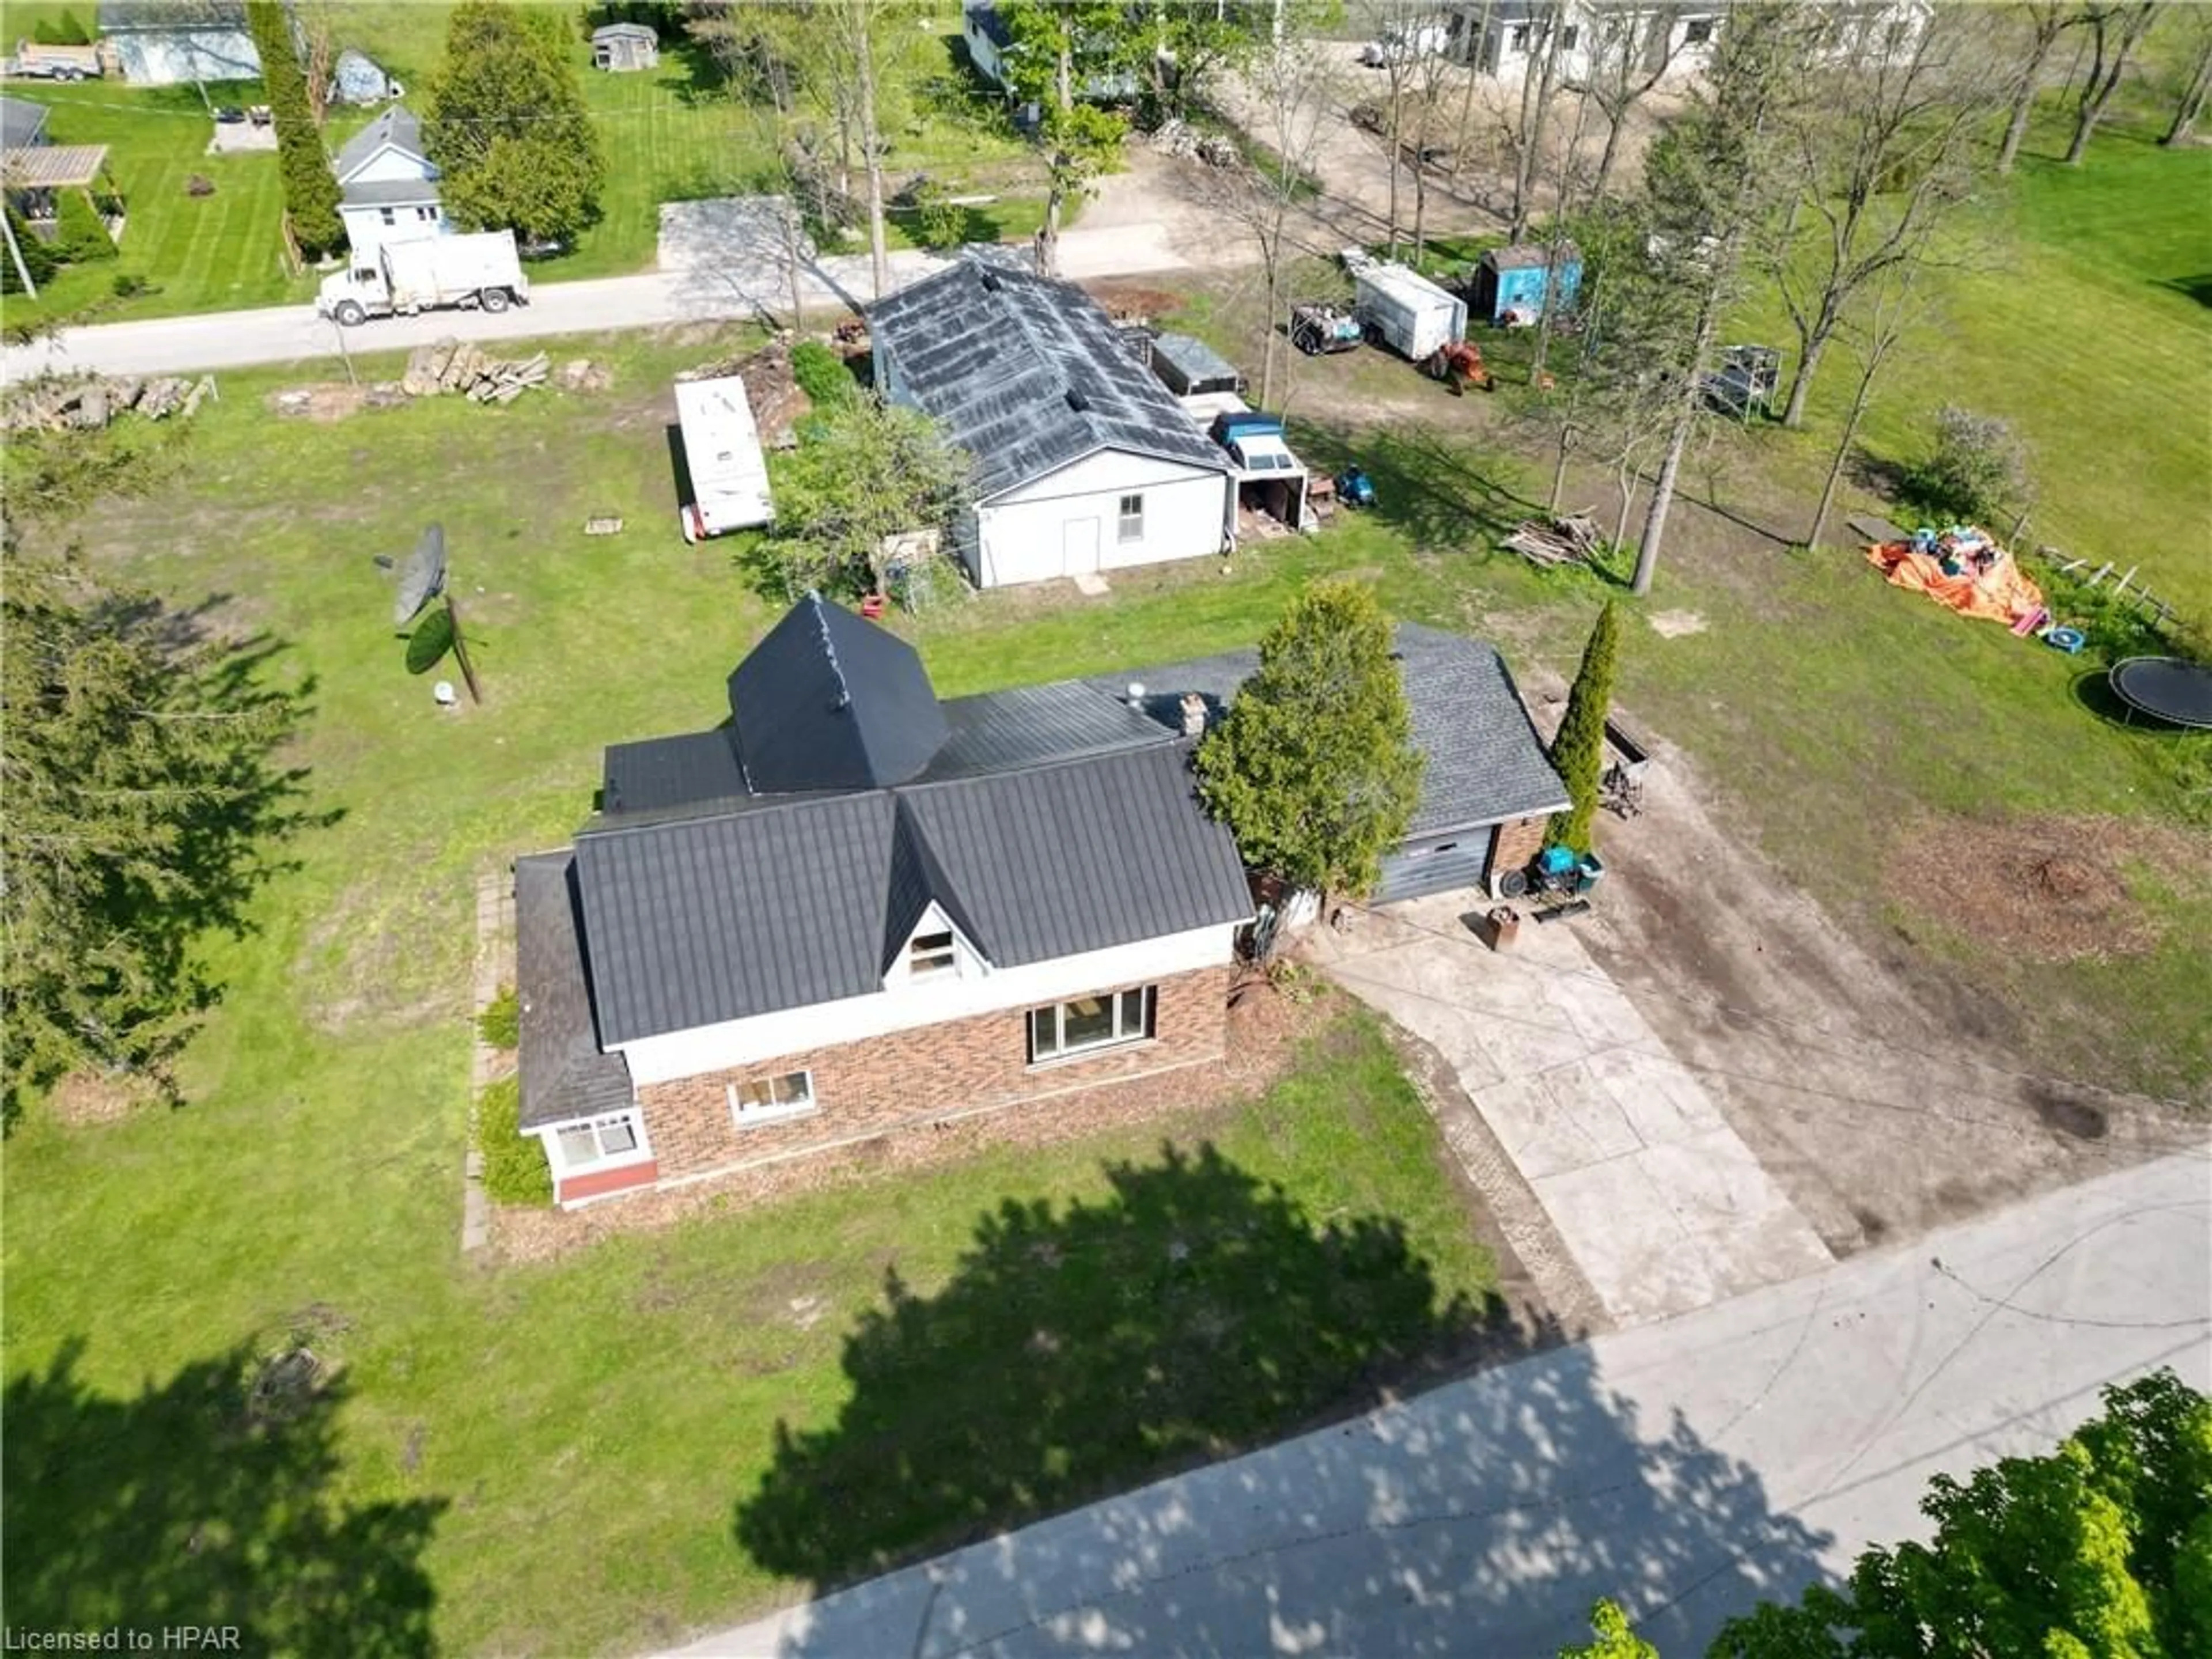 Frontside or backside of a home for 780 Napier St, Lucknow Ontario N0G 2H0